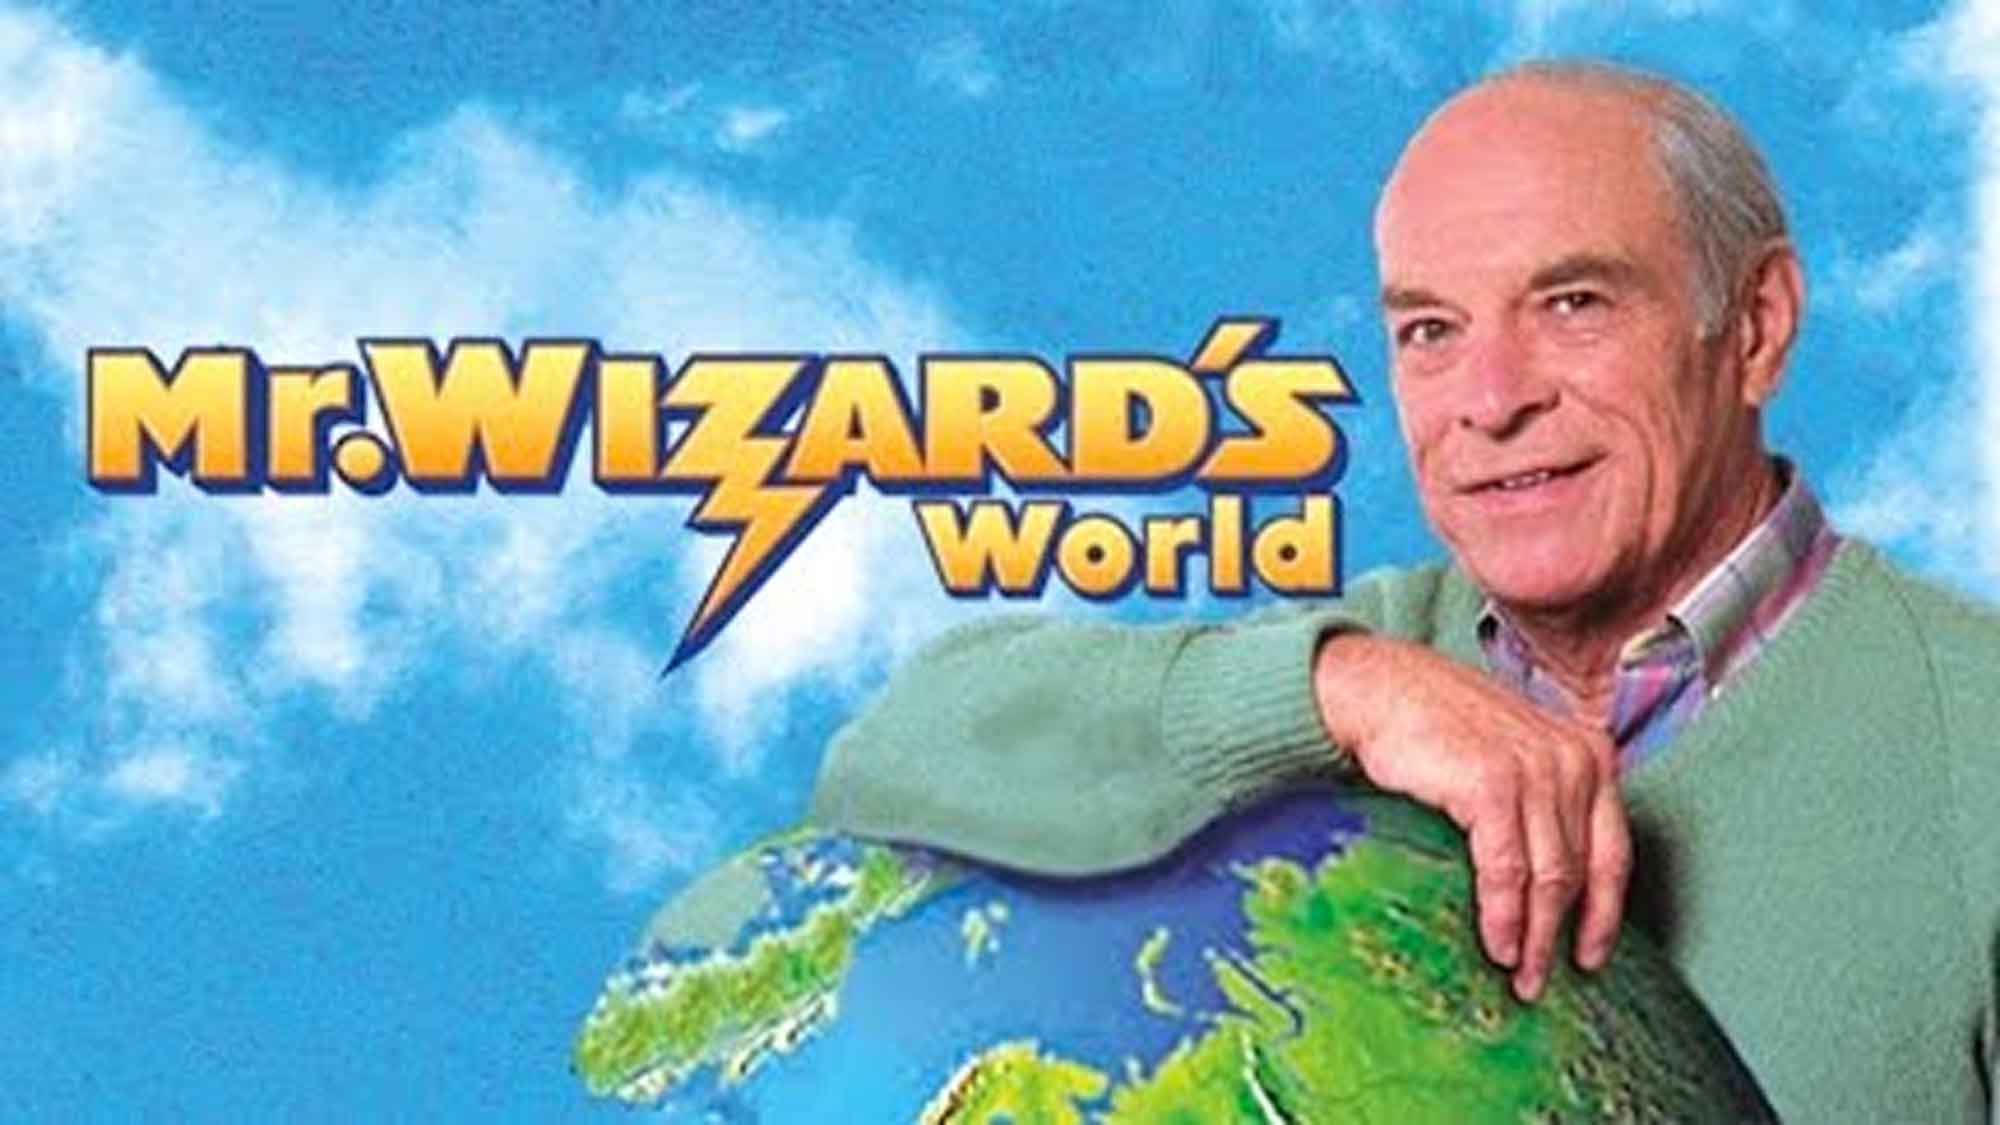 RIP Mr. Wizard - Beloved TV Personality And Science Expert Passes Away At 89